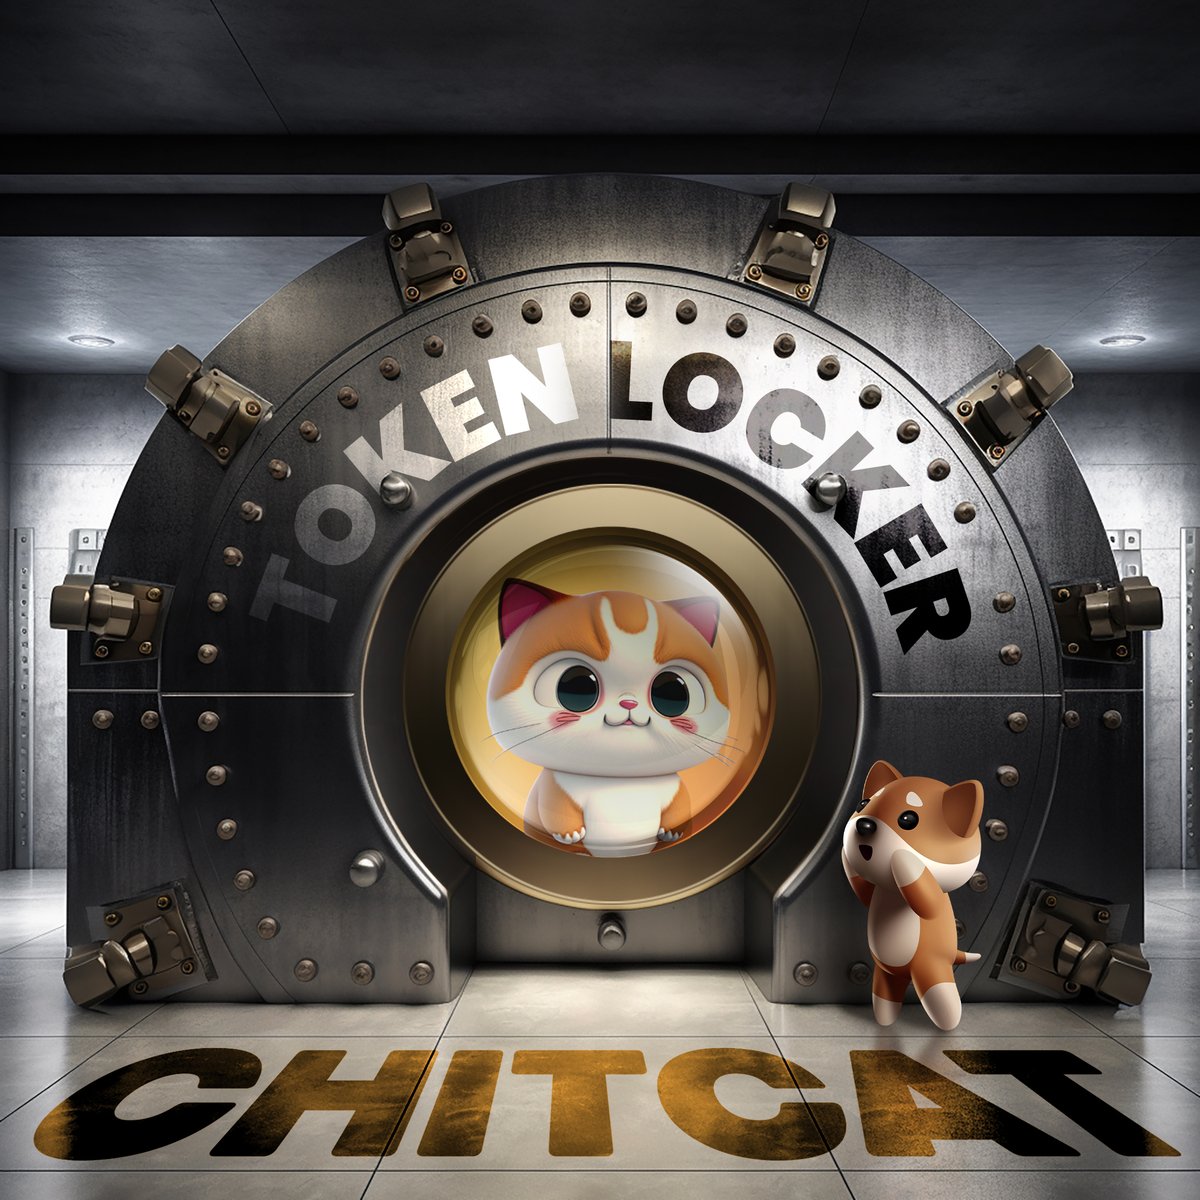 The team at @ChitCAT_ leveraged #BabyDogeSwap to lock 200,000 tokens using the #BabyDoge token locker.

Yet another crypto project team trusting BabyDoge!Use our FREE Token Locker & secure your project or LP tokens on BSC or ETH, now! 

babydogeswap.com/token-lock